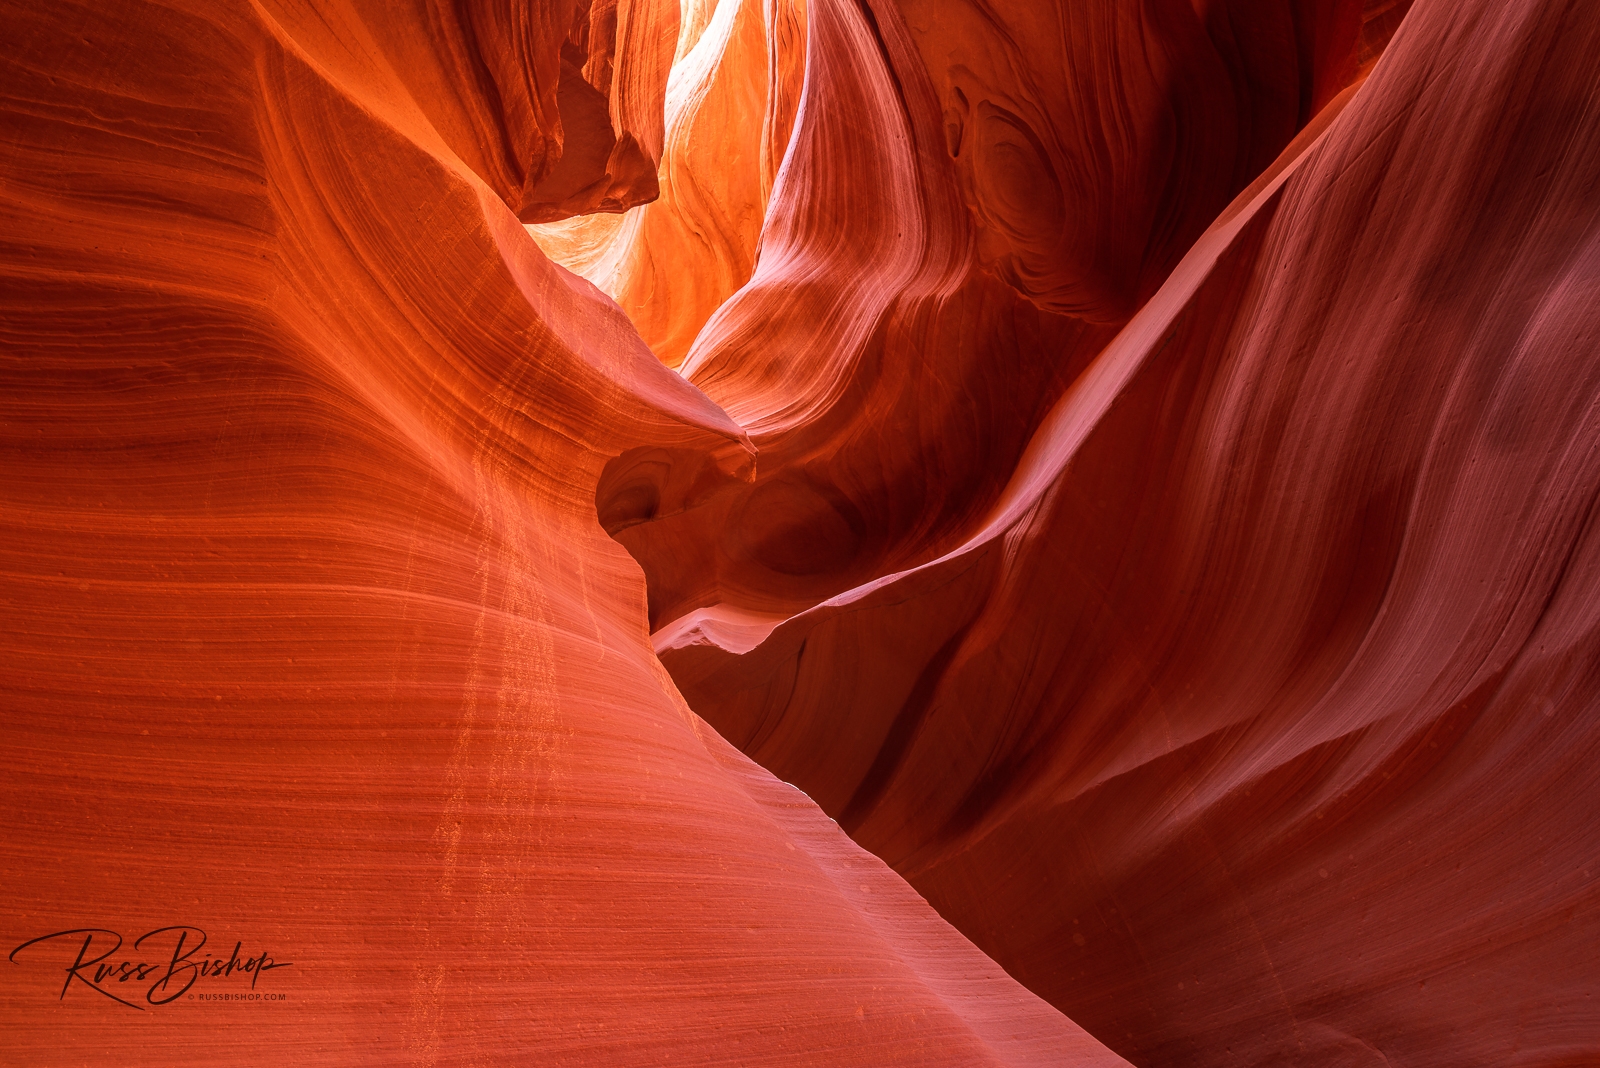 Canyon Light. Slickrock formations in lower Antelope Canyon, Navajo Indian Reservation, Arizona